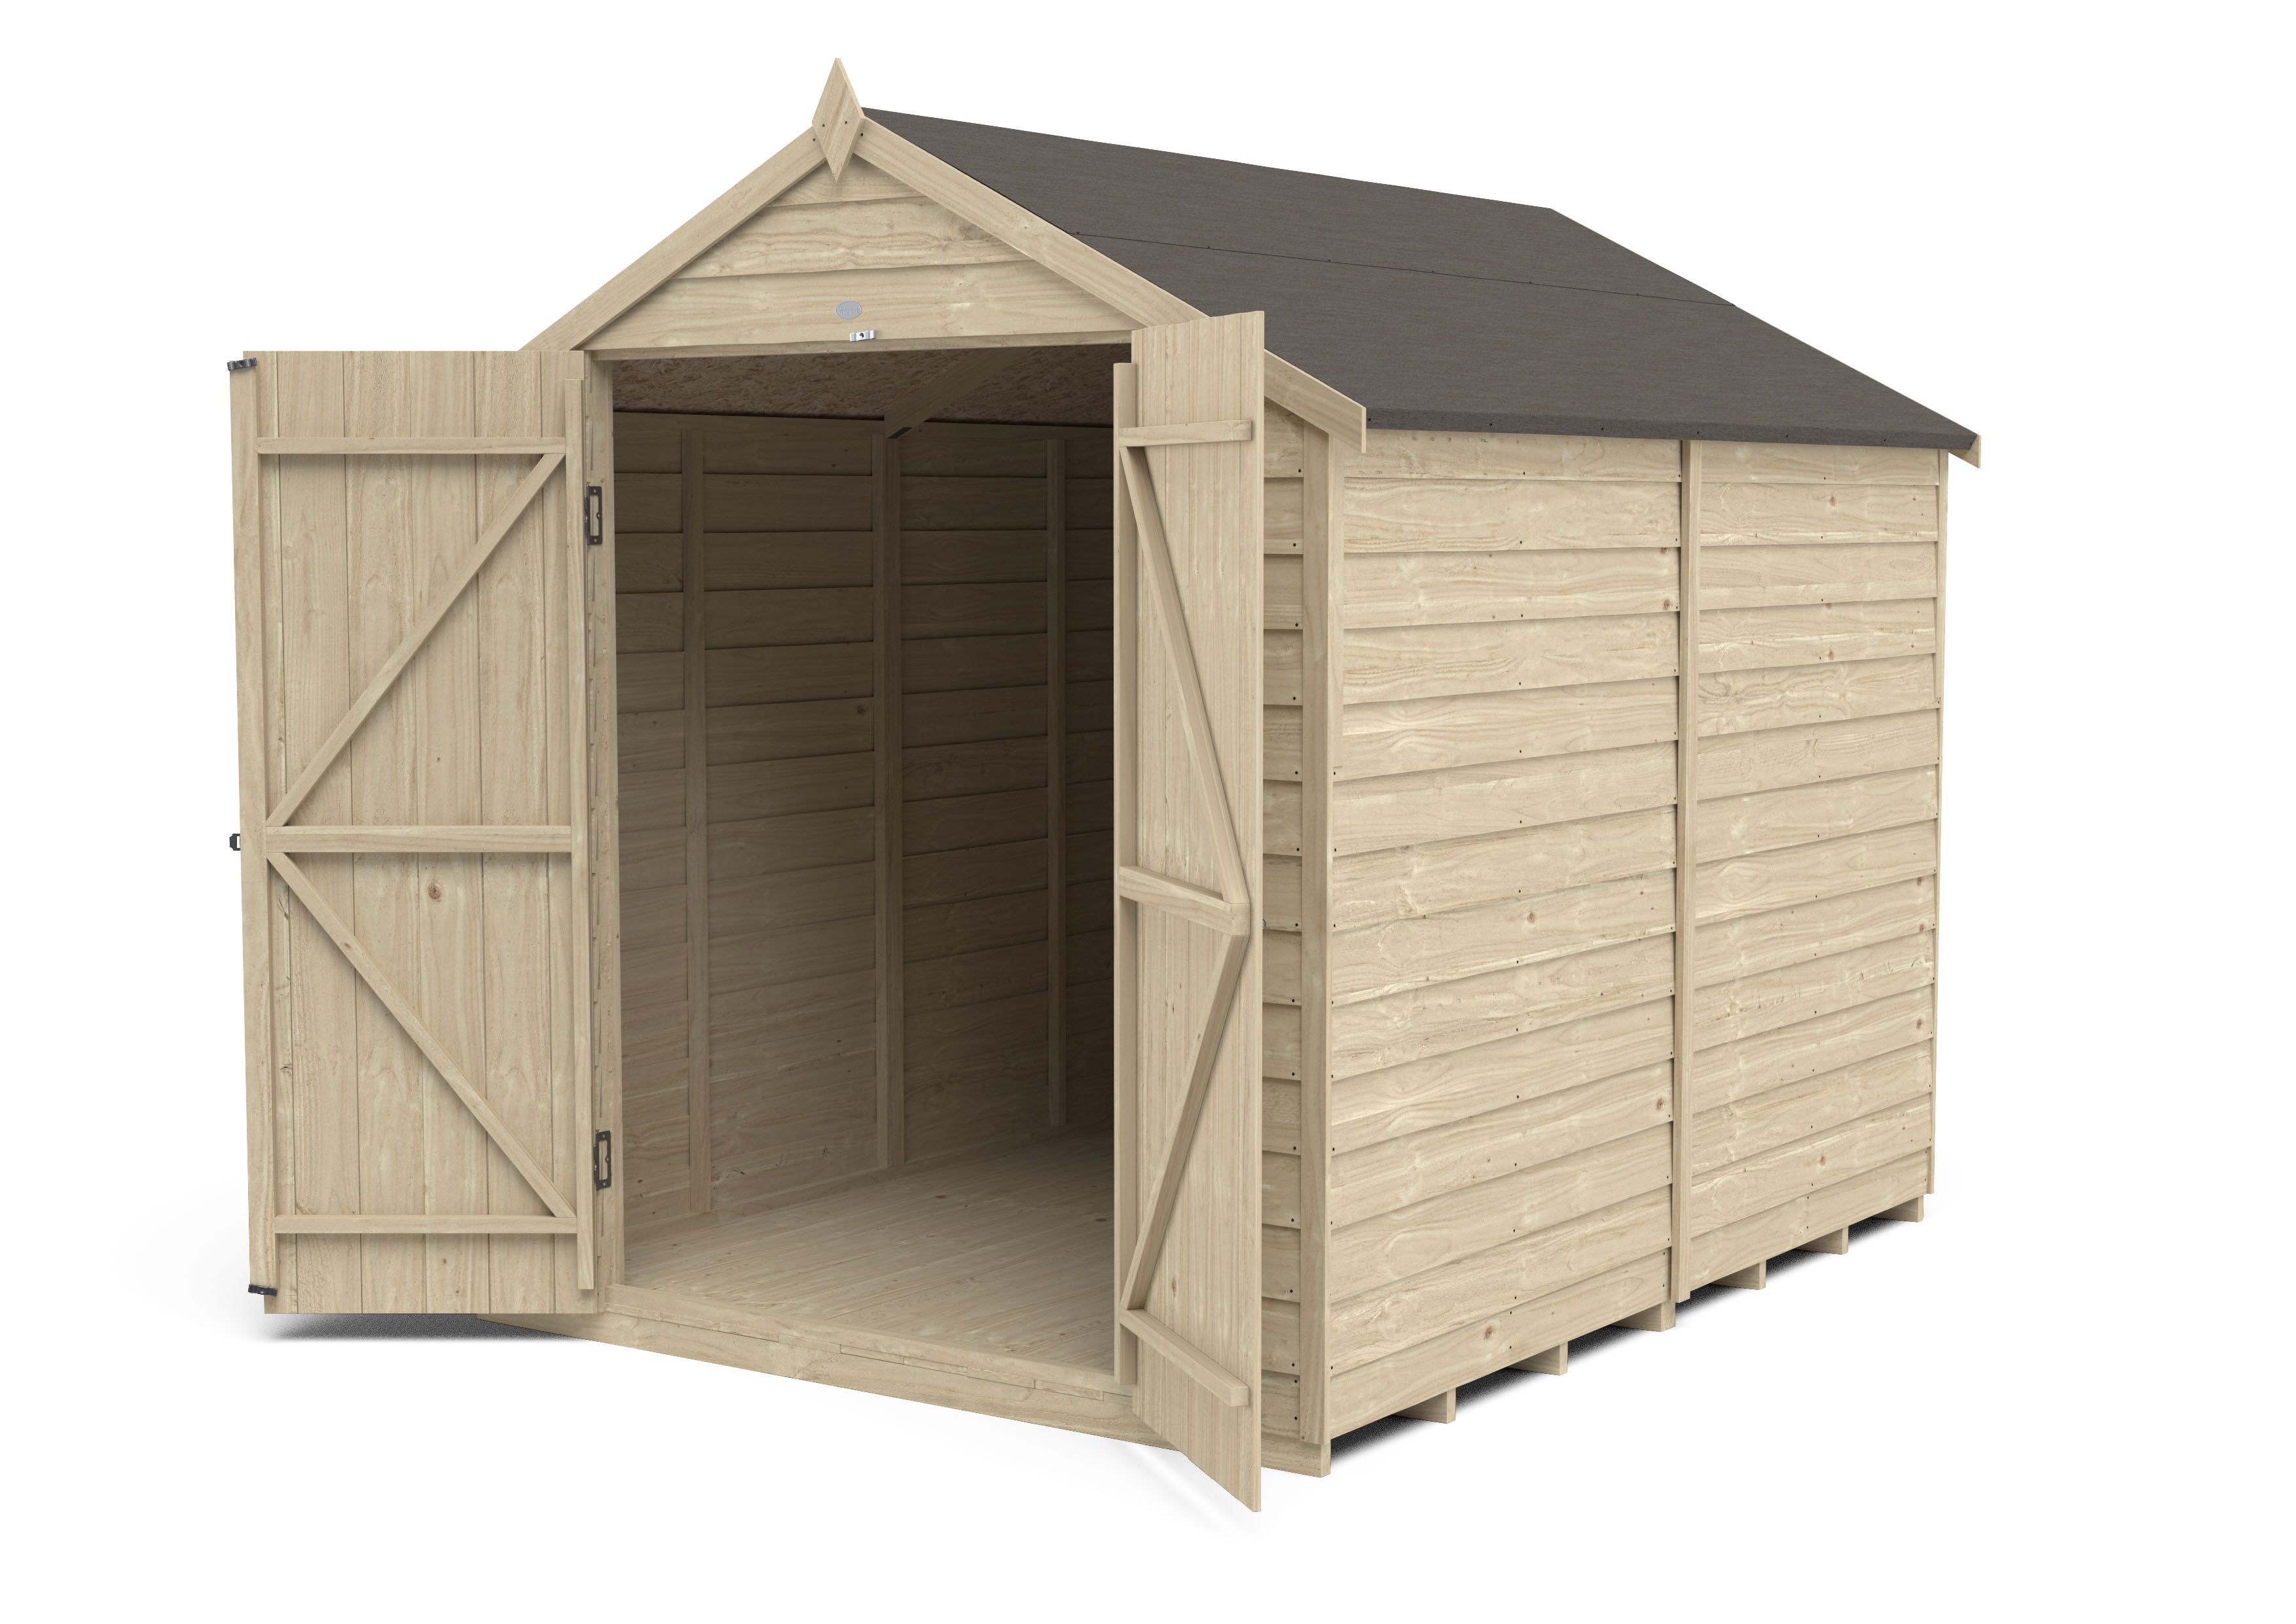 Forest Garden Overlap 8x6 ft Apex Wooden 2 door Shed with floor (Base included) - Assembly service included